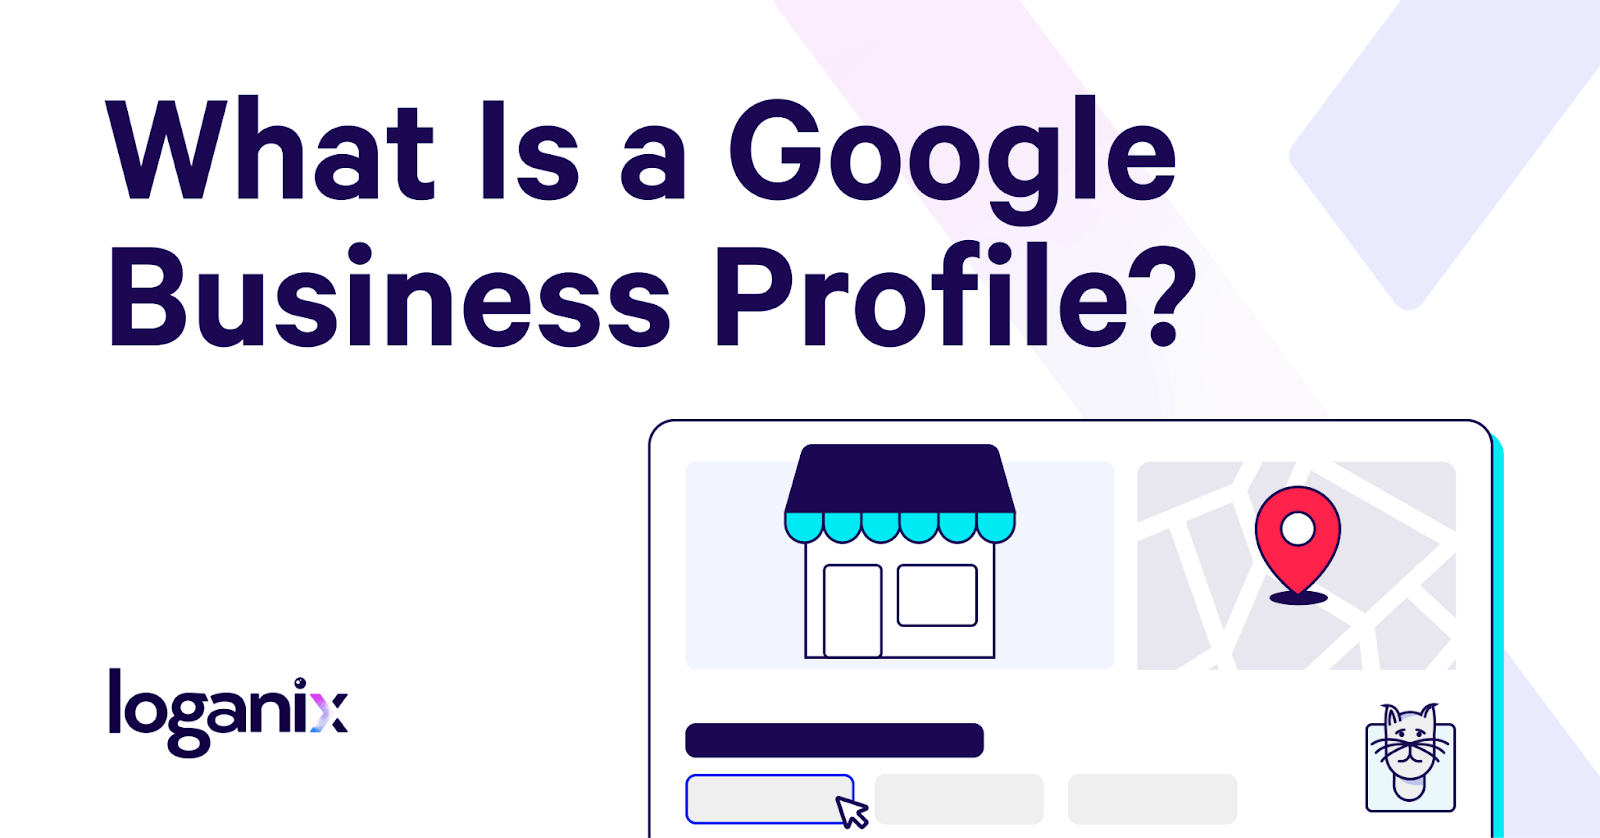 What Is Google Business Profile?